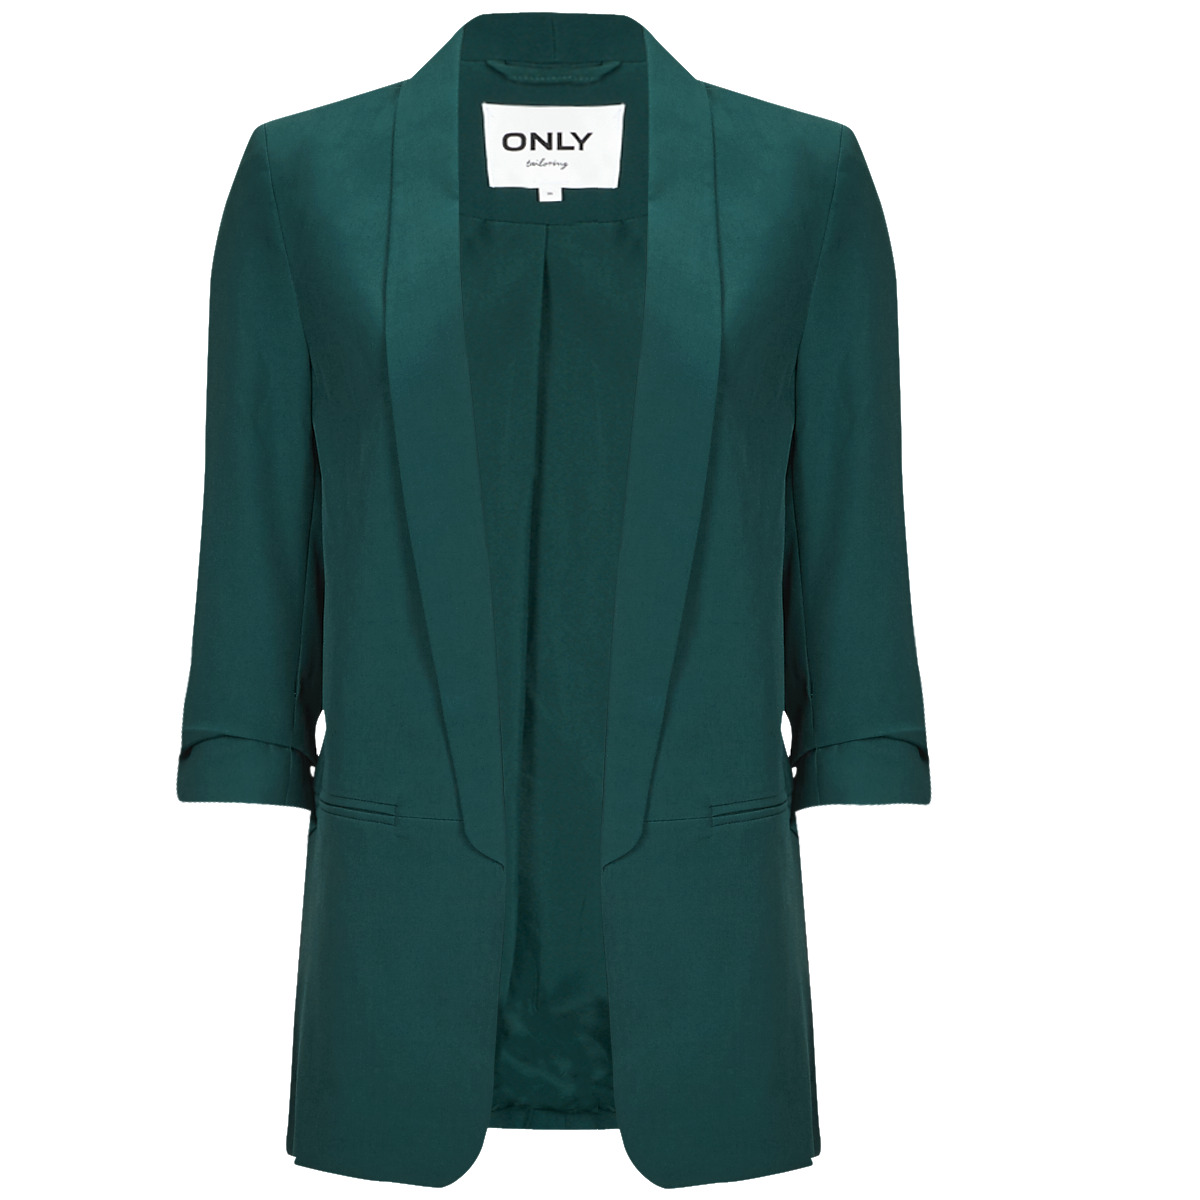 Only ONLELLY 3/4 NET ! Clothing - BLAZER LIFE Spartoo Green - Jackets Women | Blazers delivery Free / TLR